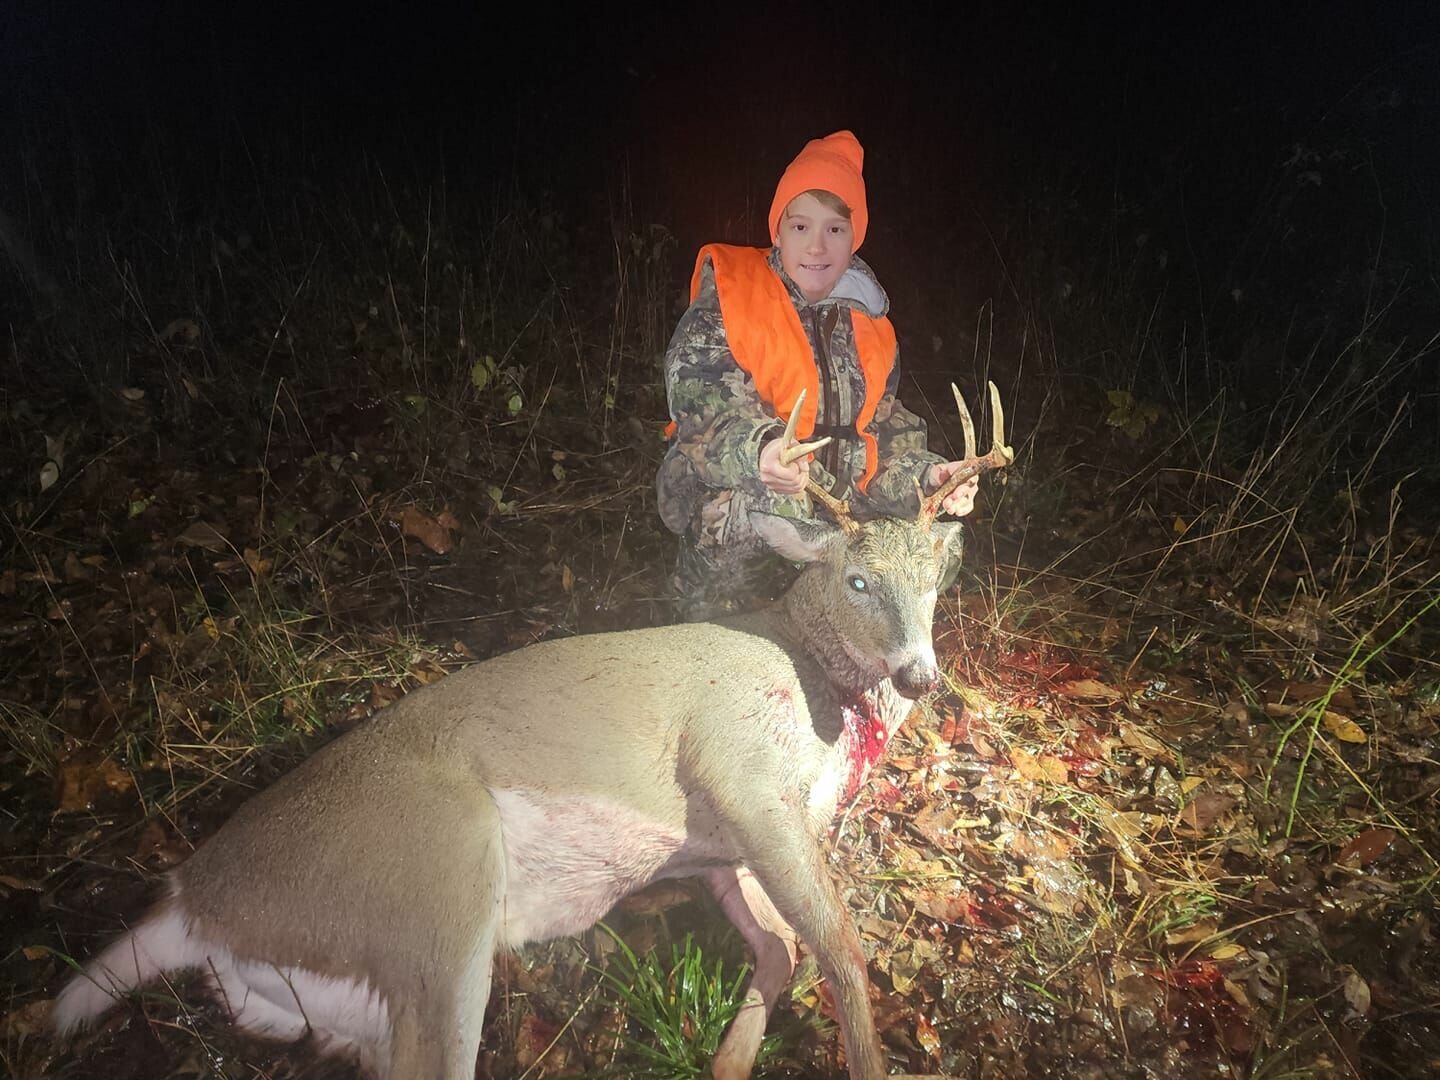 Archer Hoefer, 13, with his 7 point buck.